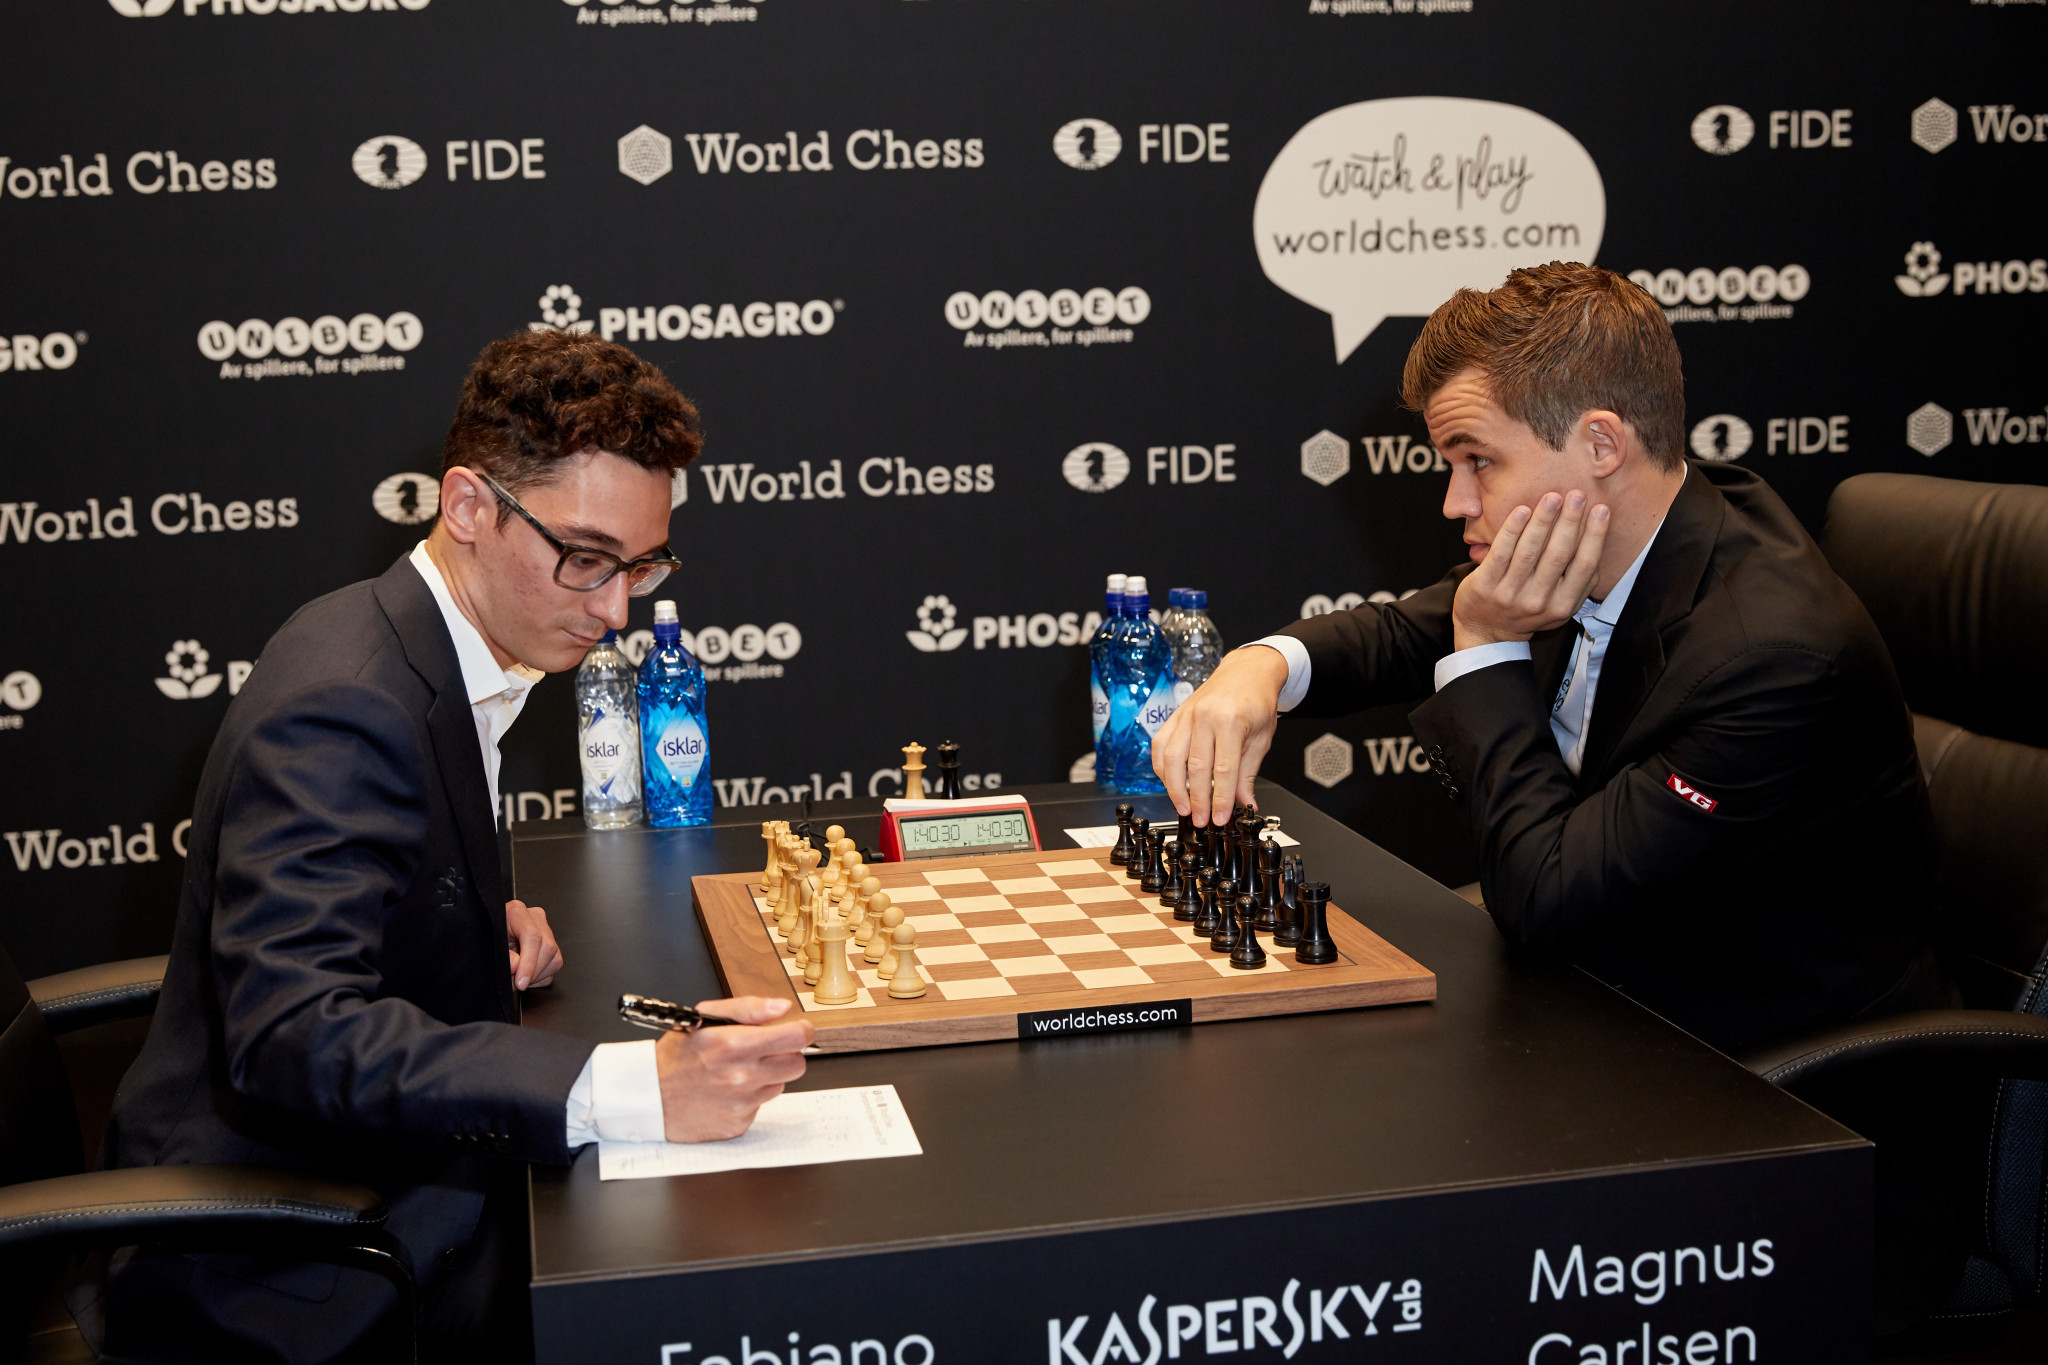 Seventh draw for Carlsen and Caruana as World Chess Championship moves into second half